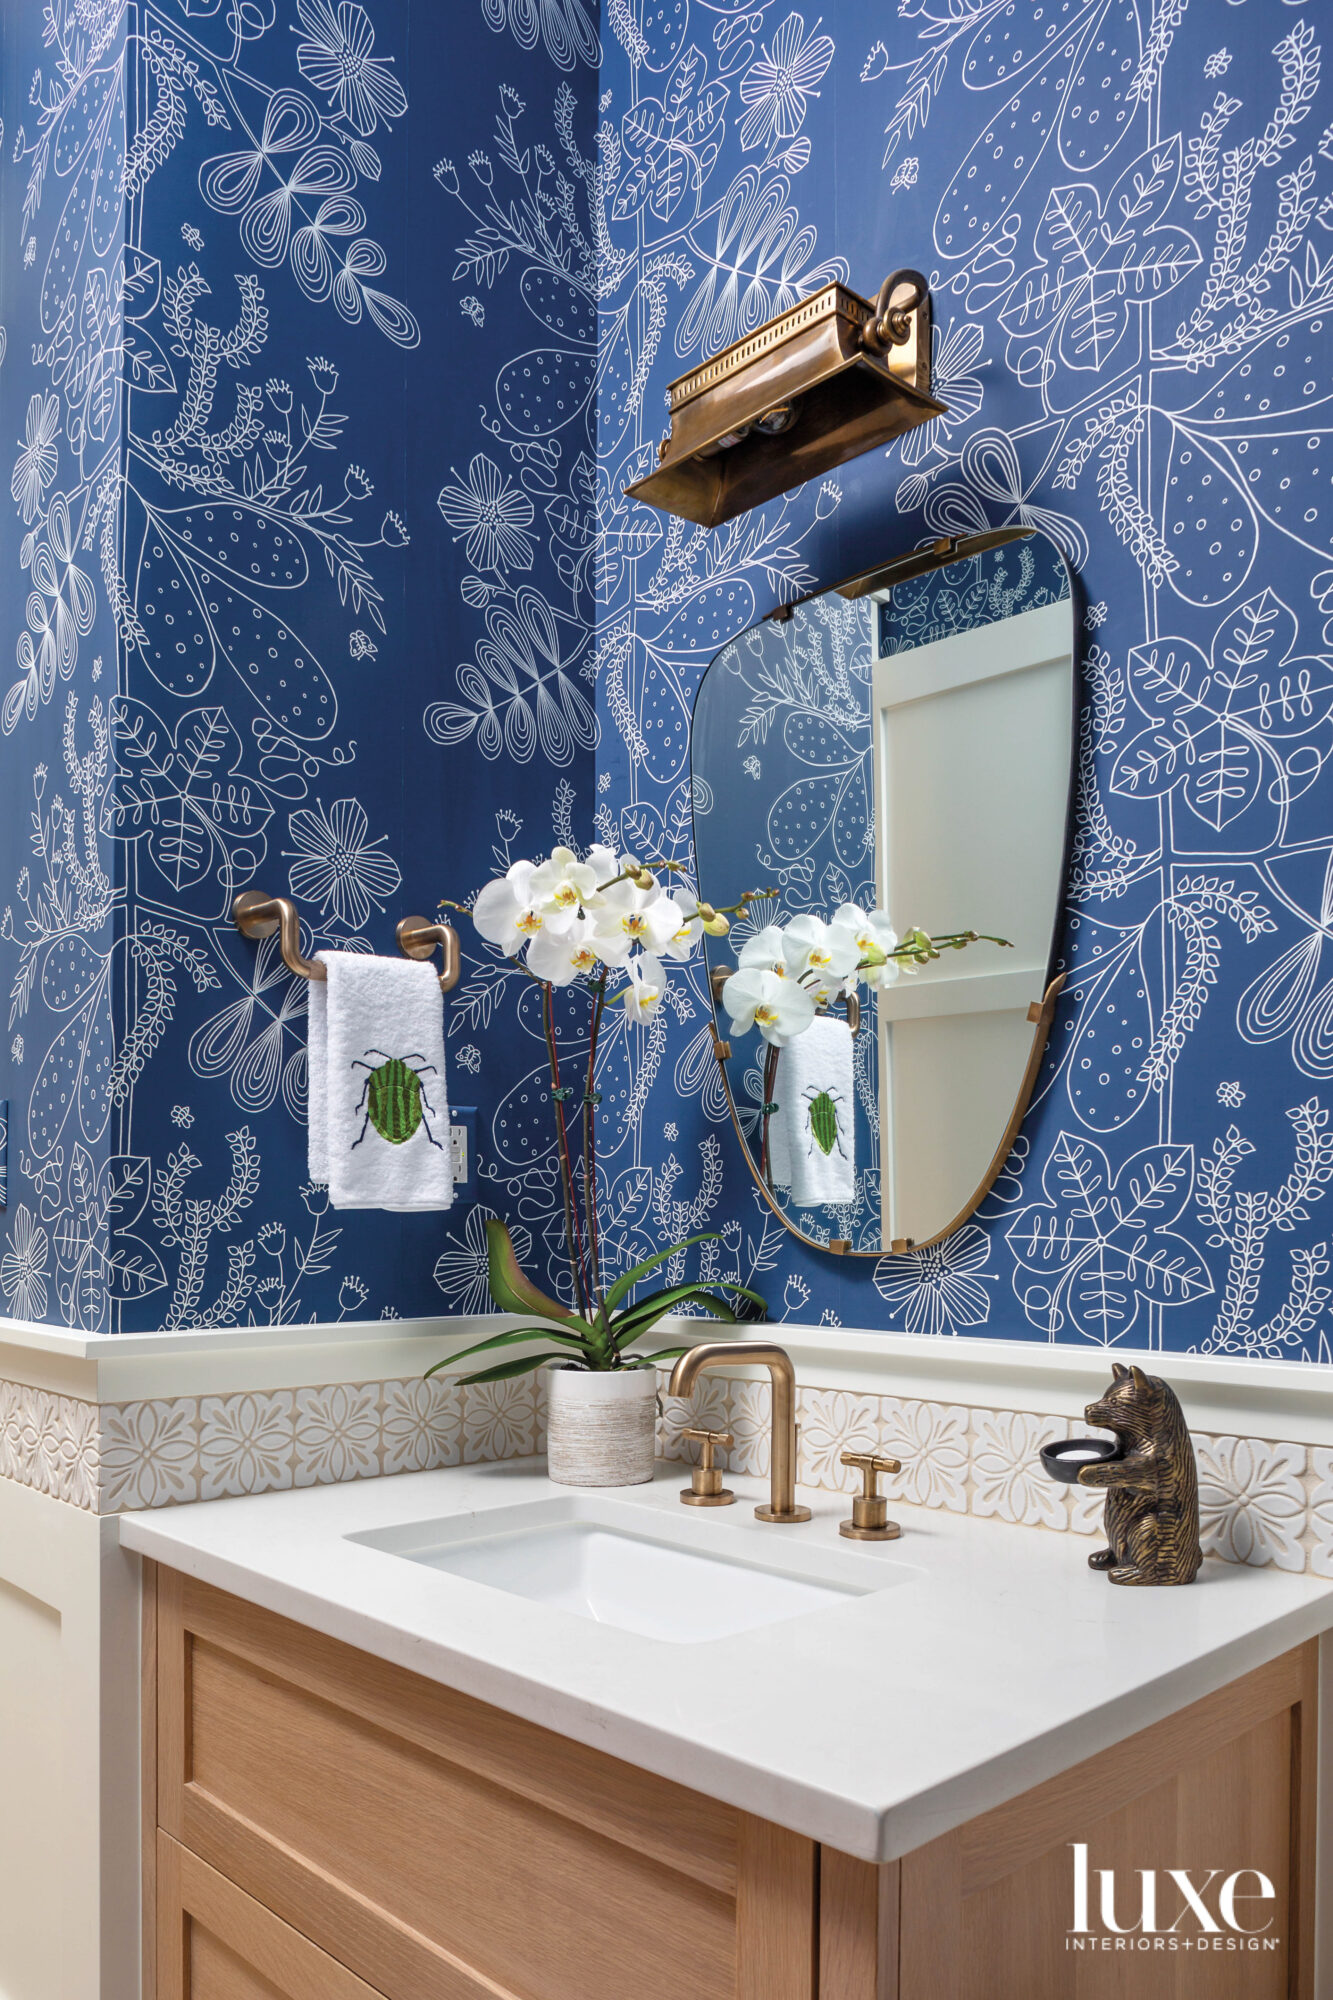 The powder room has a bright blue wallcovering and a brass light fixture.